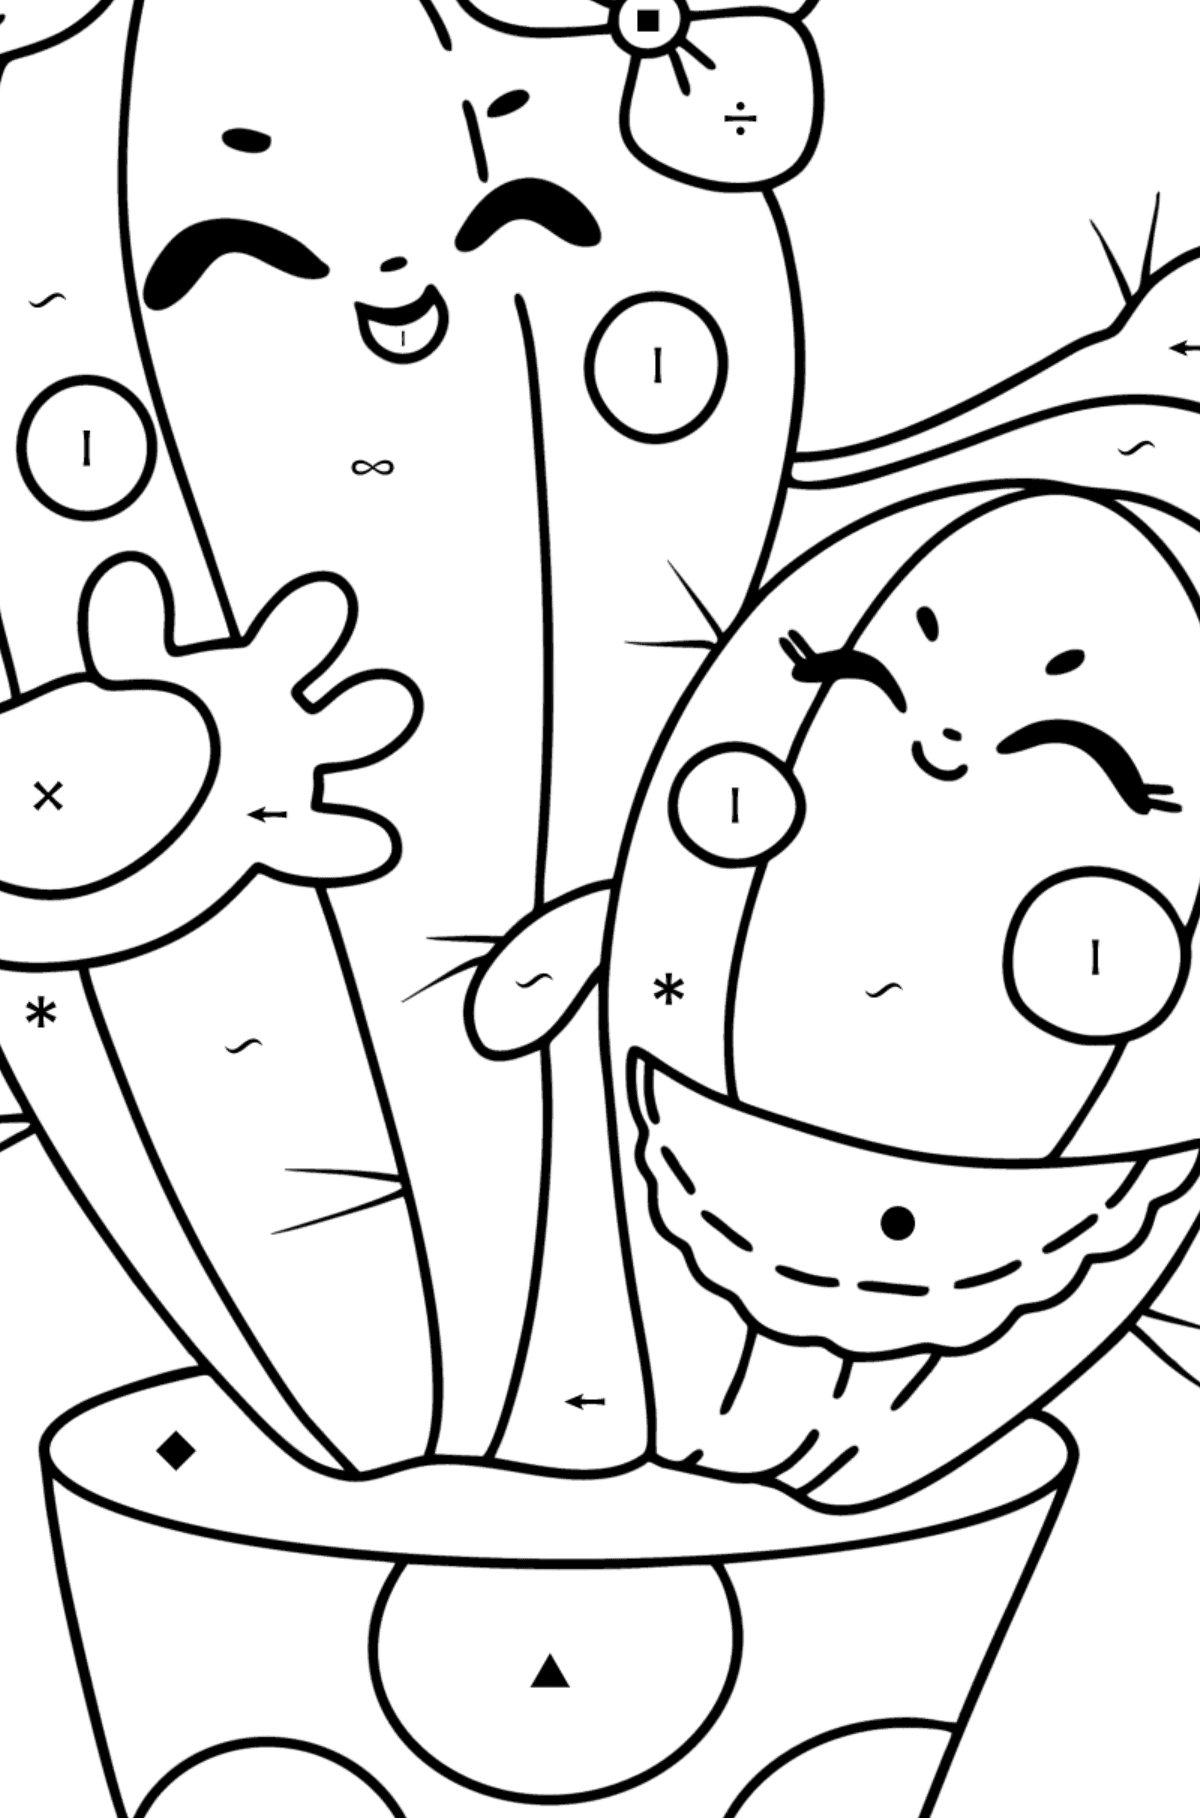 Cartoon Cactus coloring page - Coloring by Symbols for Kids